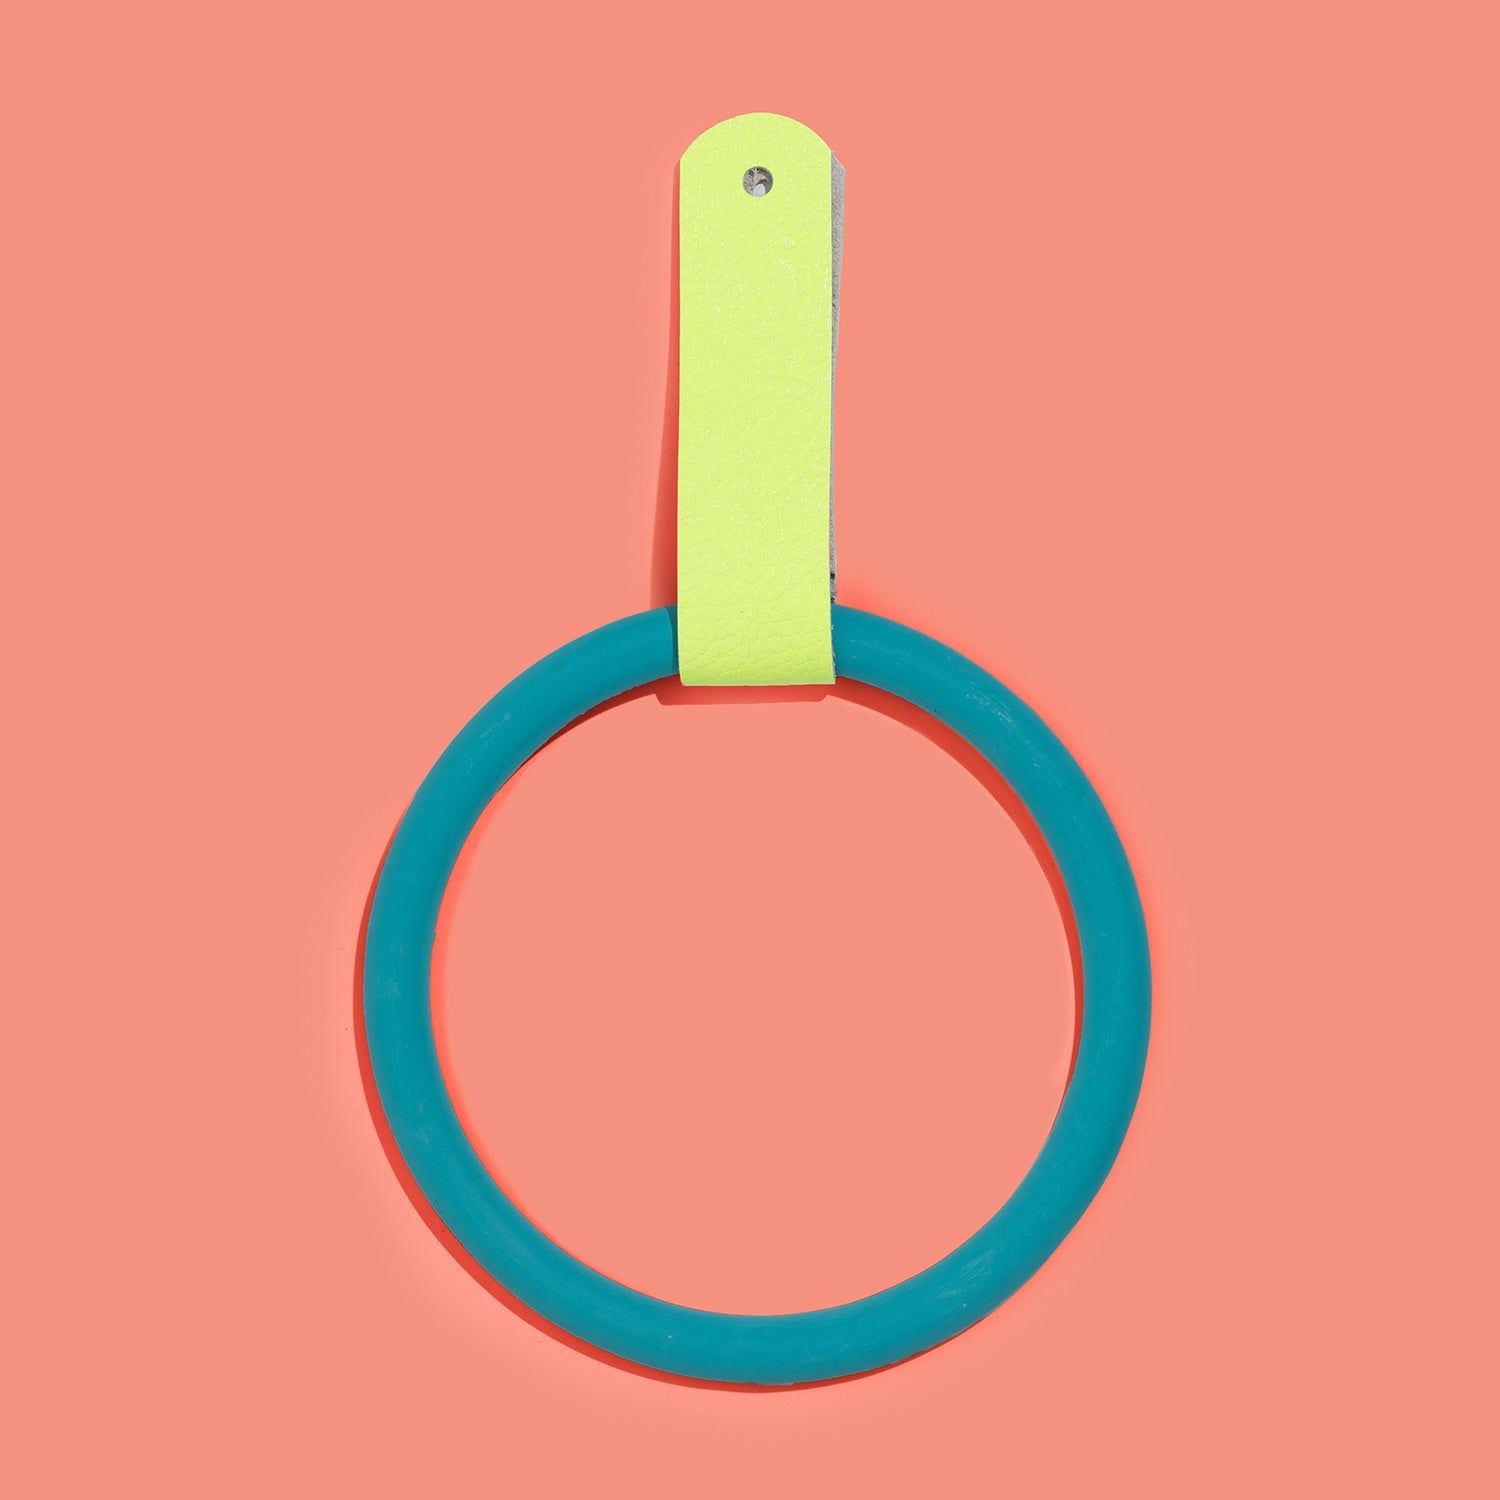 Towel Ring & Leather Strap - Teal Block Colour - Misshandled